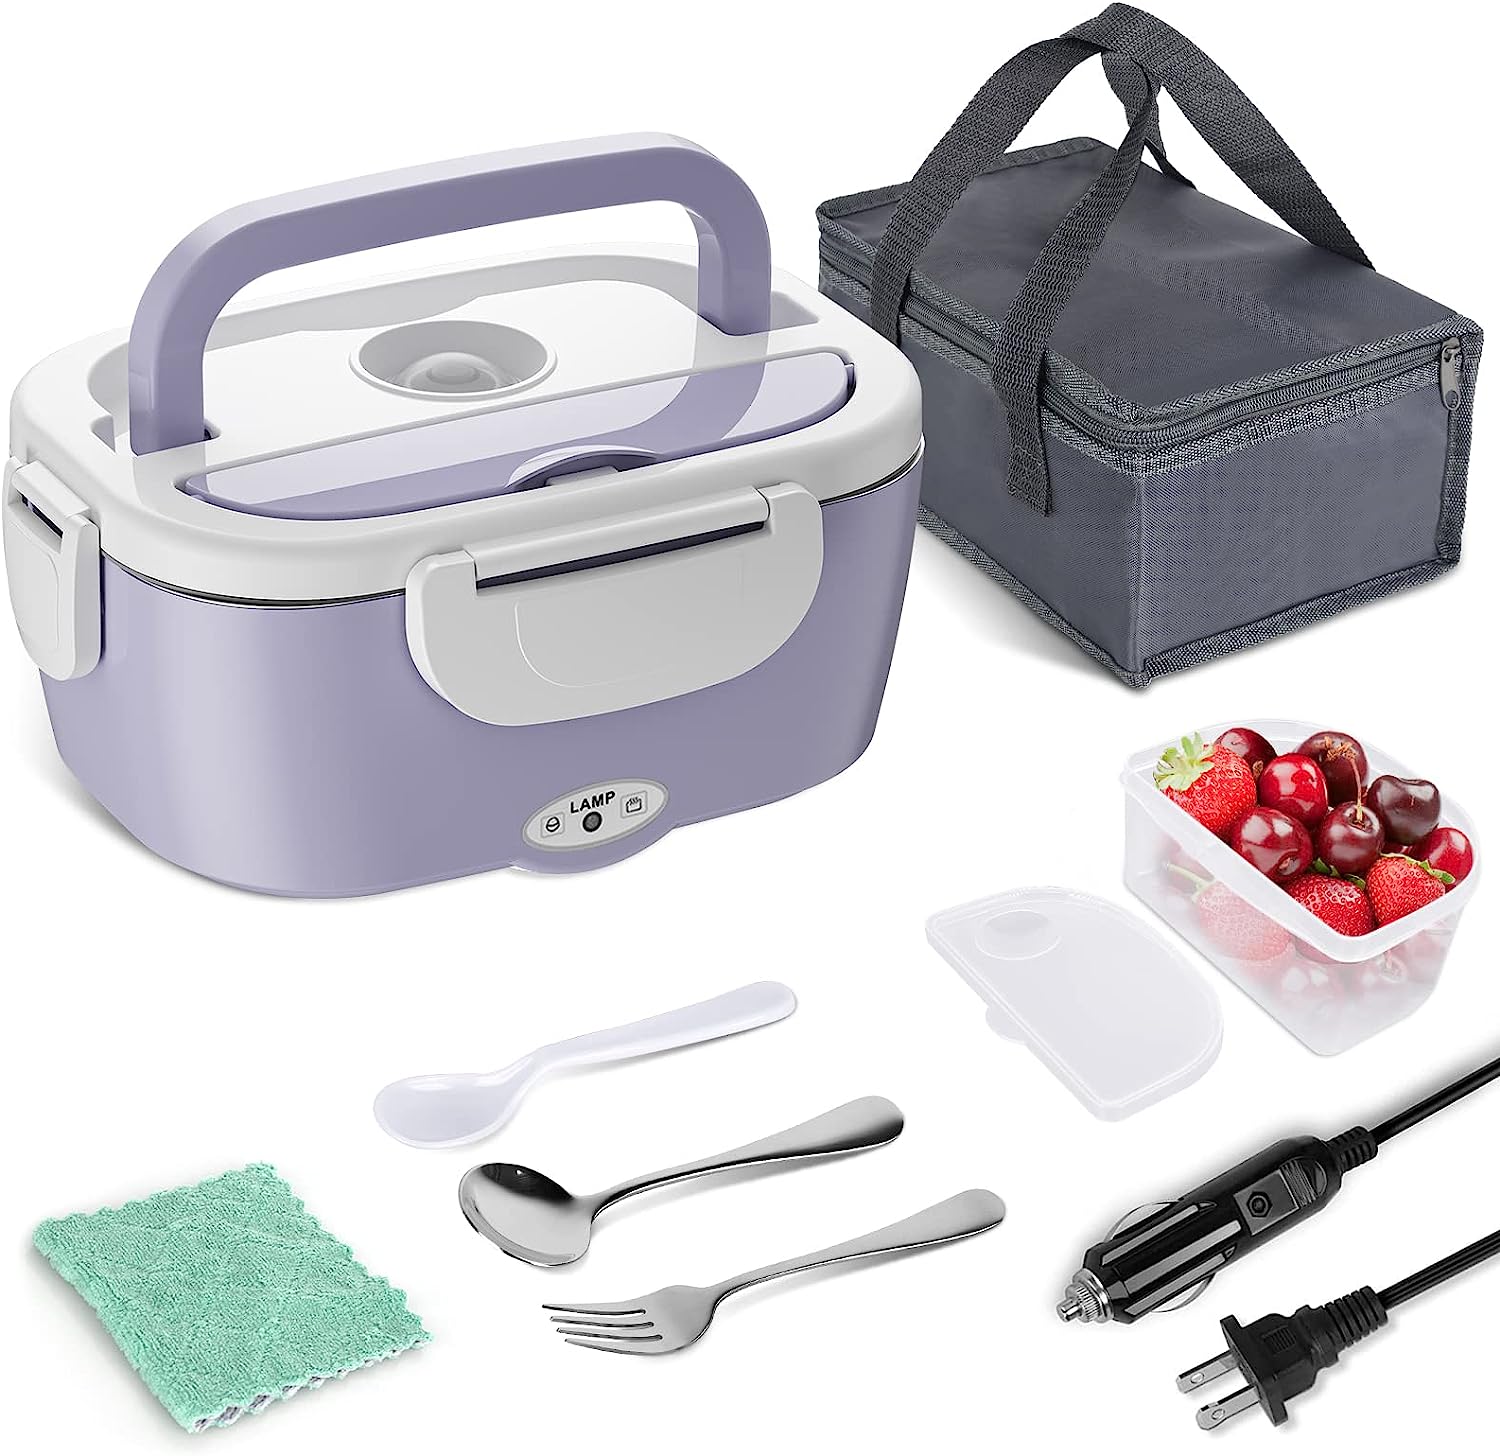 Carsolt Electric Lunch Box Food Heater - 3 in 1 [...]